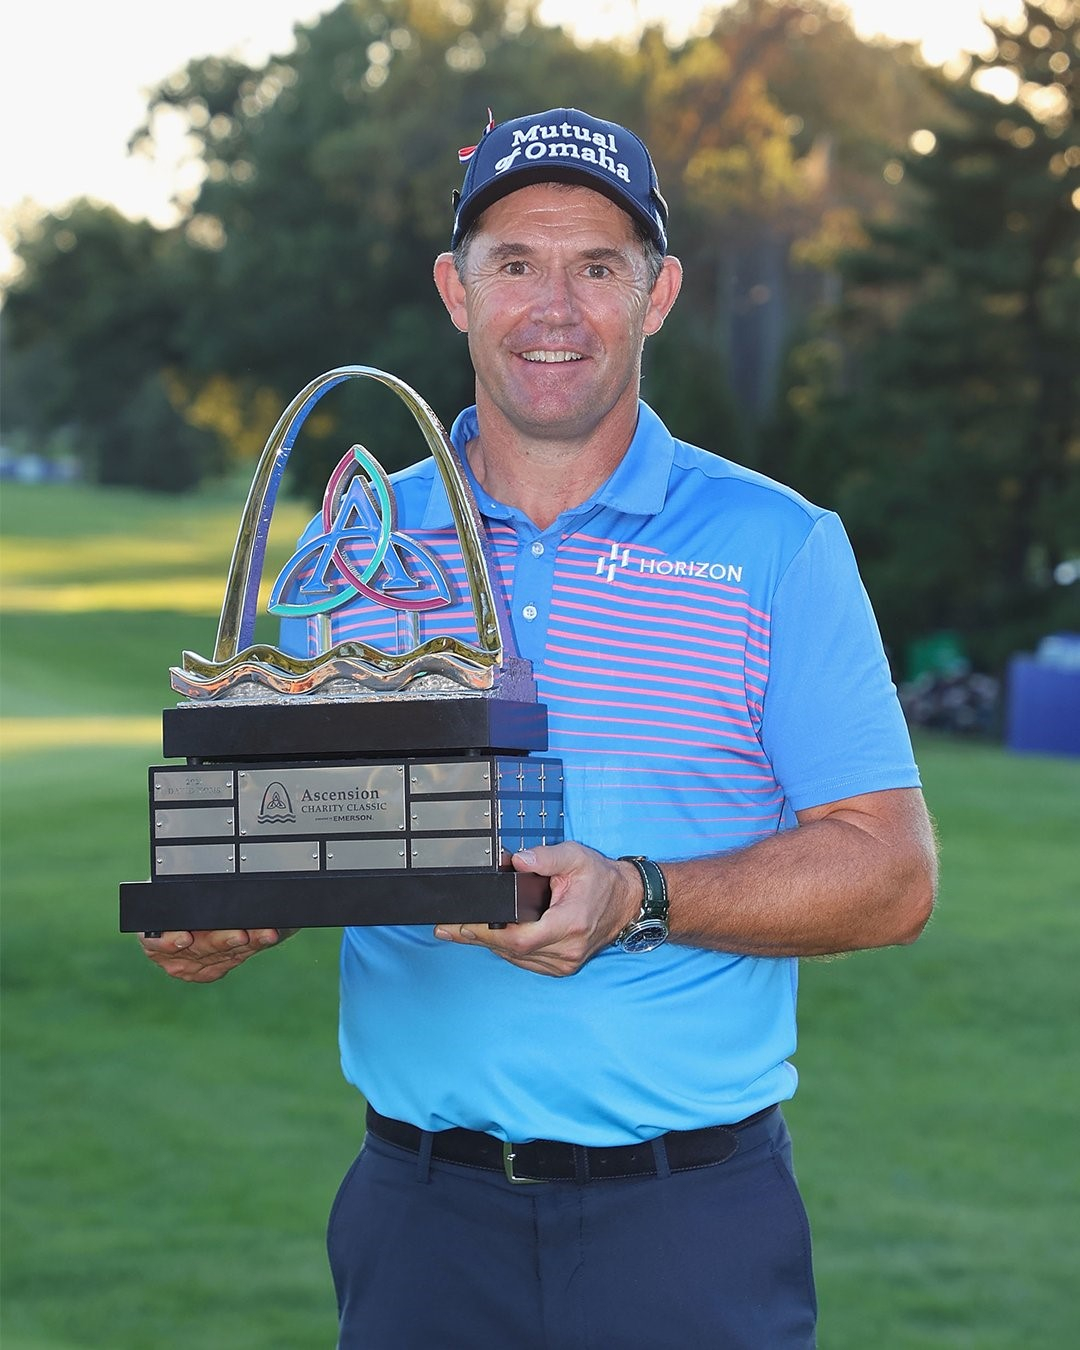 Ascension Charity Classic Winner Padraig Harrington with trophy made by Malcolm DeMille